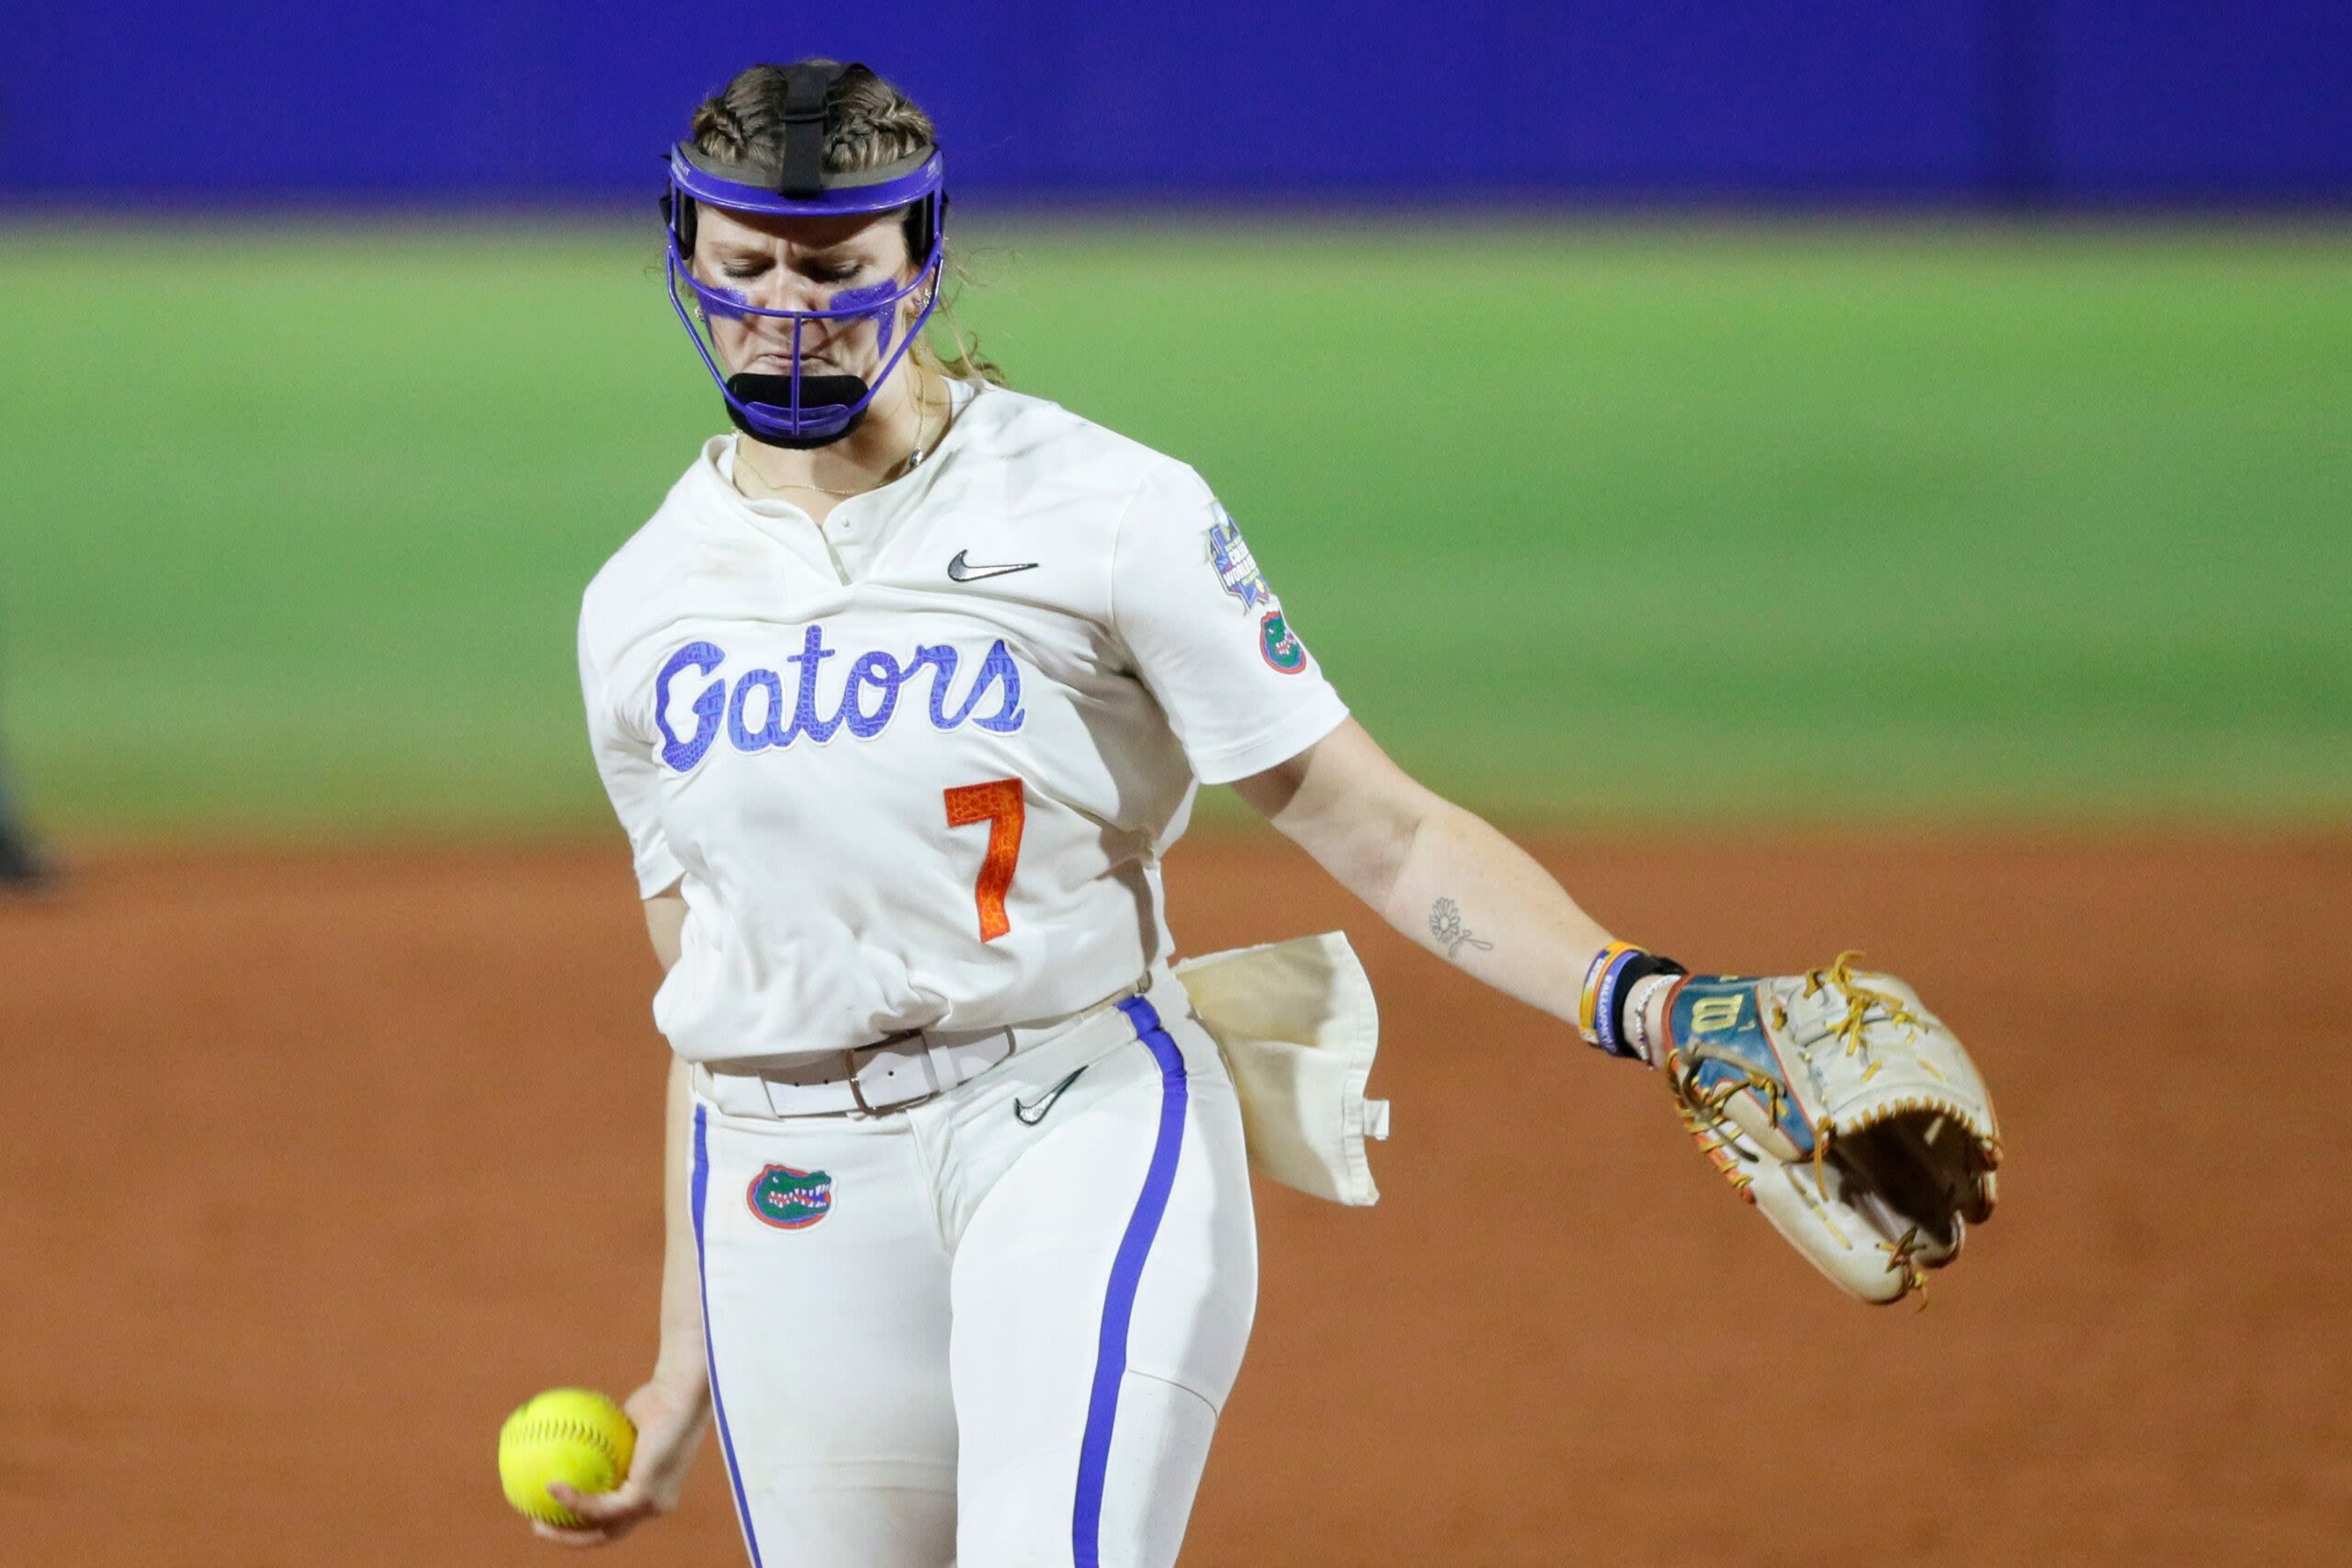 Texas will face Florida on Saturday after Gators’ 1-0 win over Oklahoma State